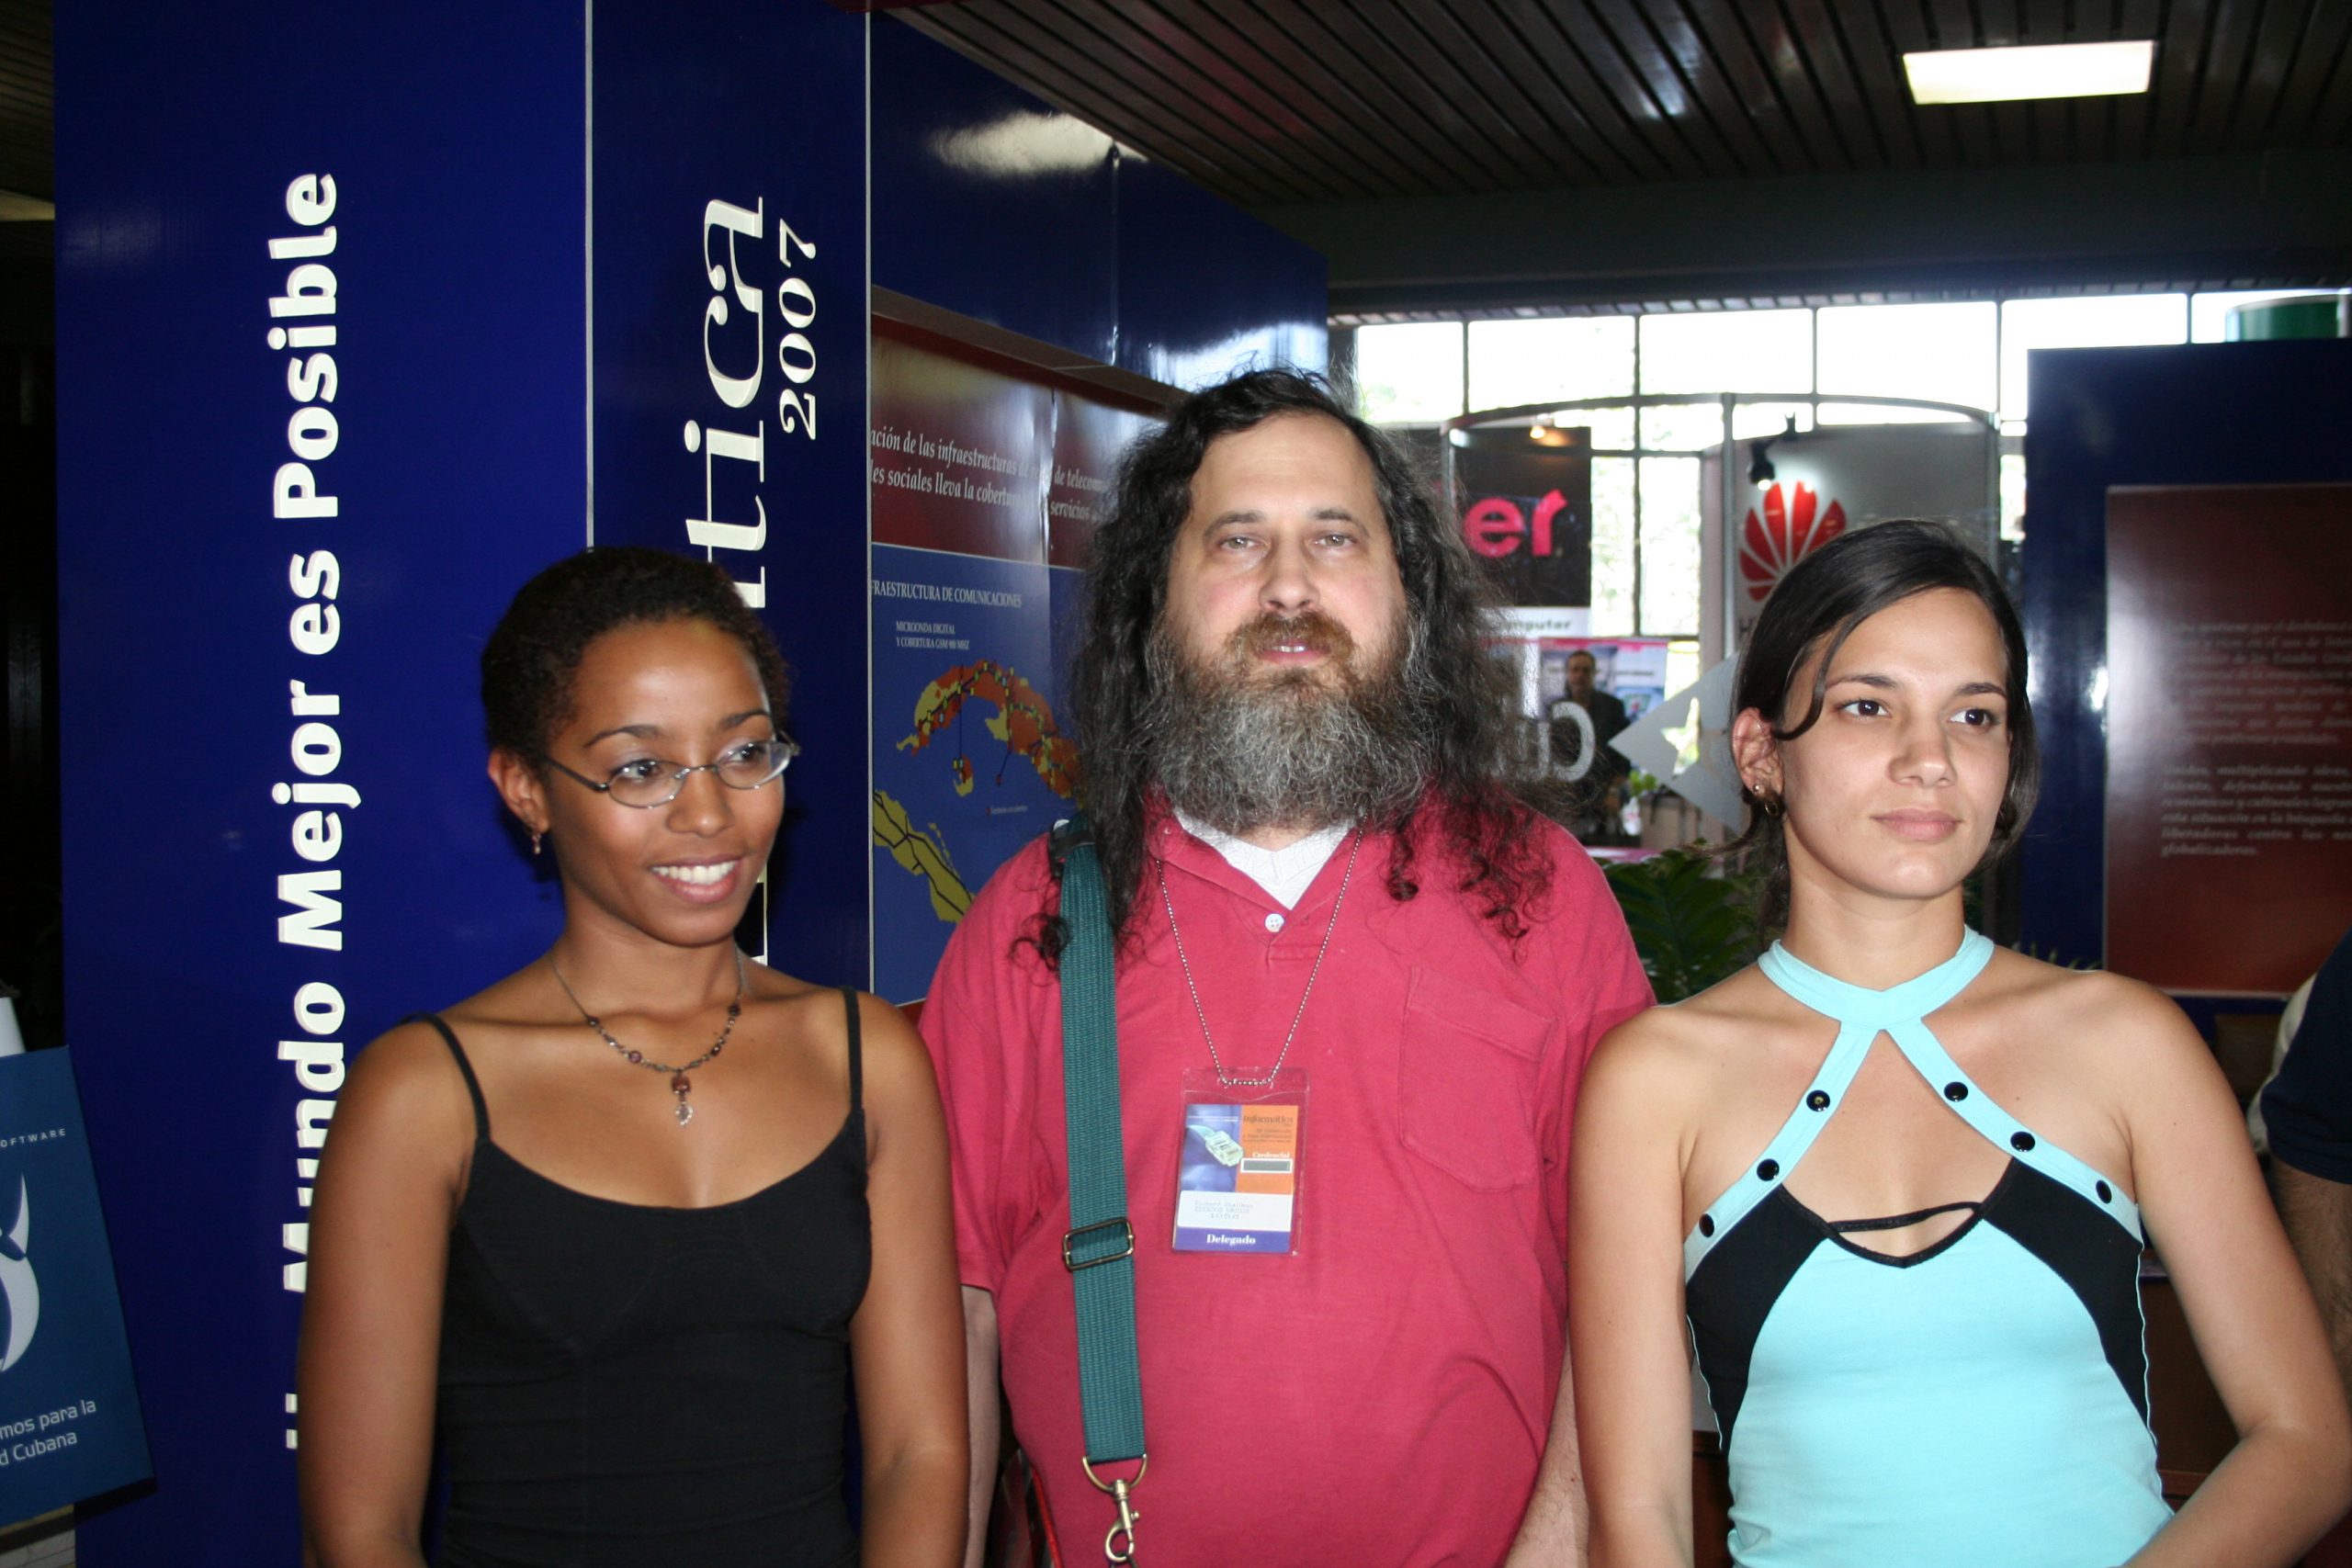 2007 The Fair is visited by Richard Stallman, Free Software Foundation